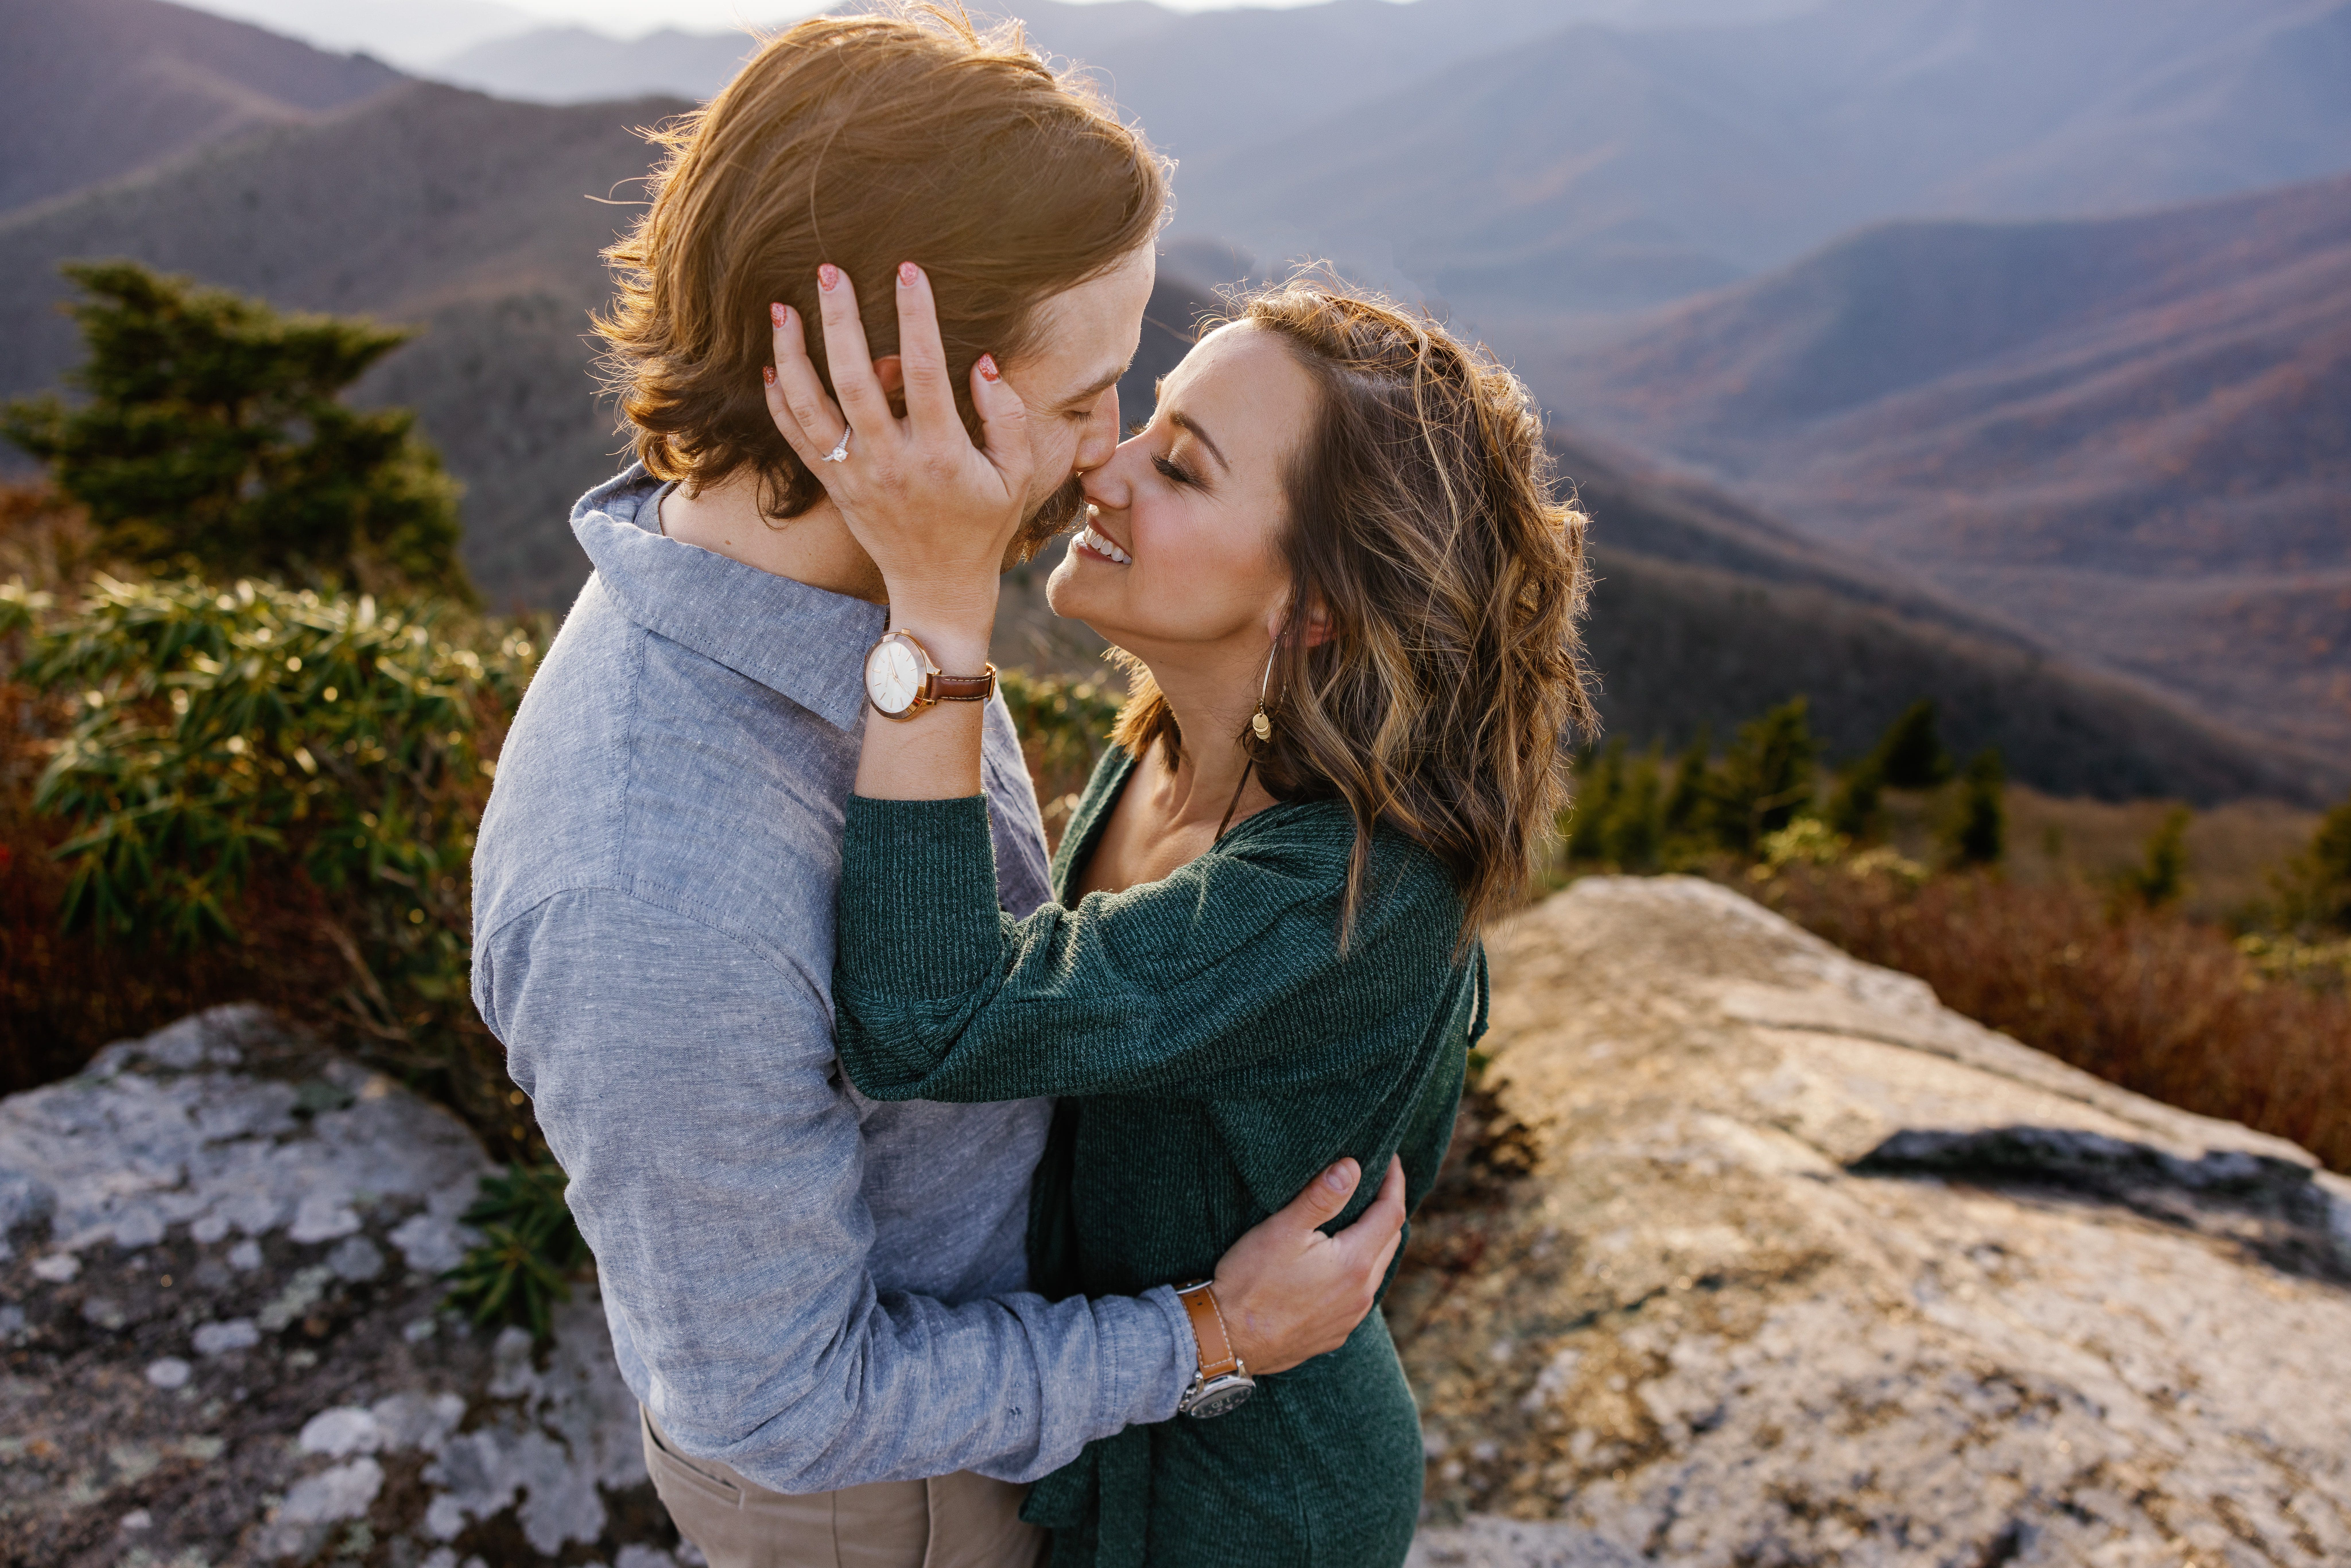 Tips for Blue Ridge Parkway engagement photos in Asheville | Kathy Beaver Photography